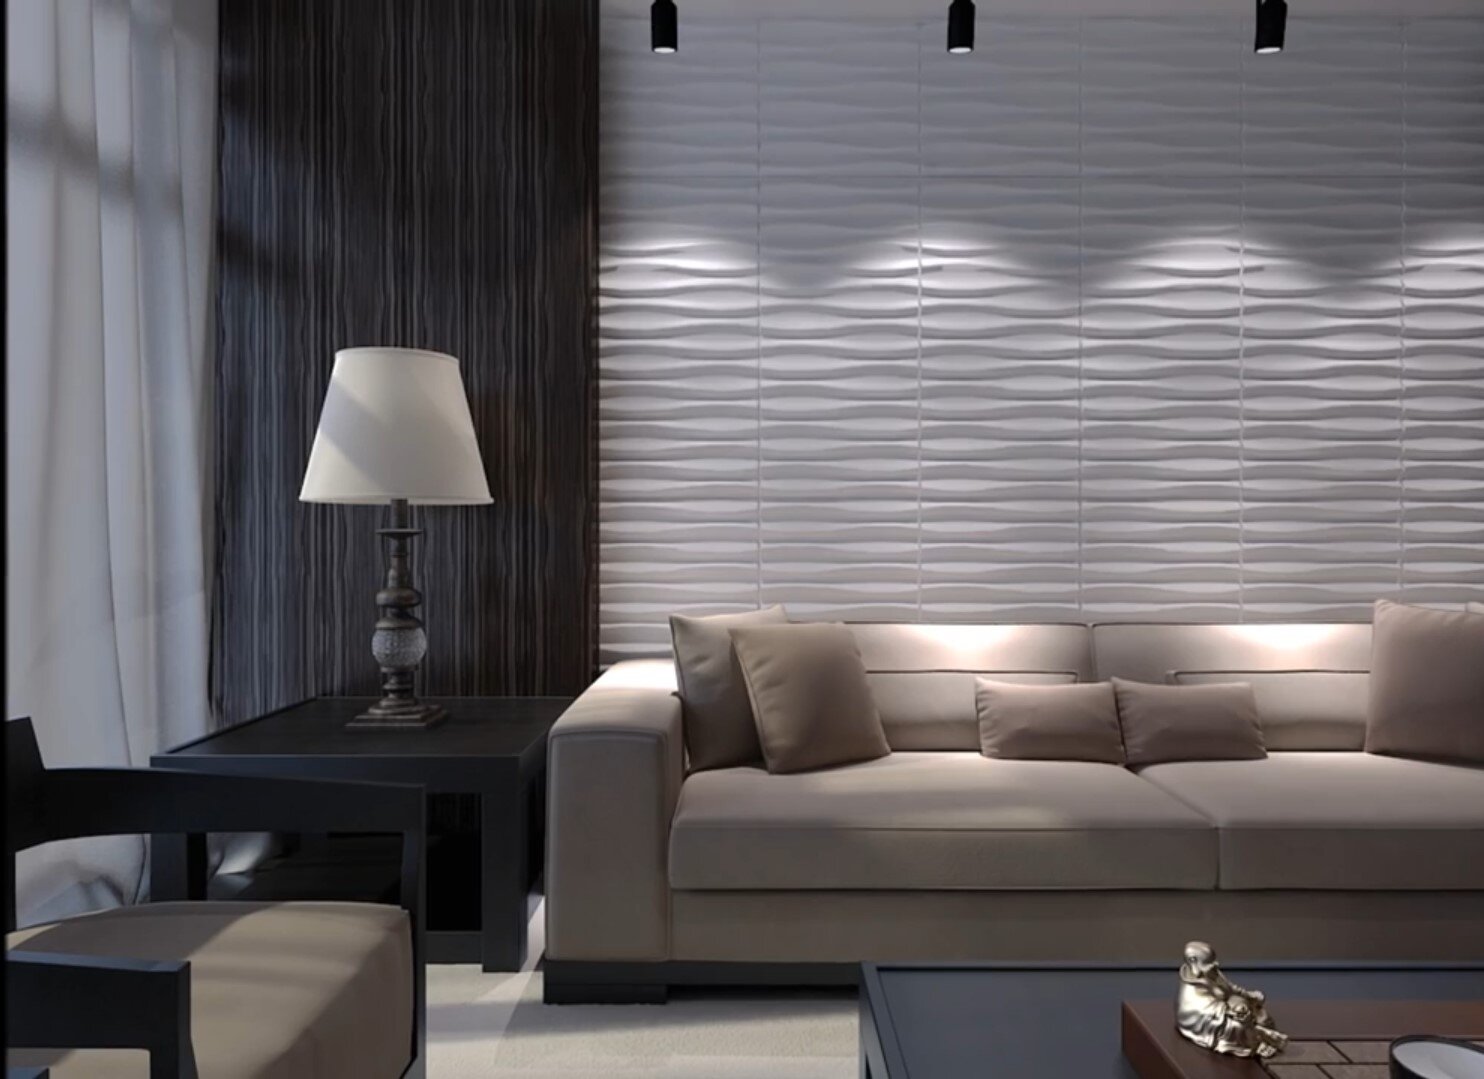 Accent Wall Ideas Beyond The Ordinary - Reflect Your Personal Style 00028.jpg